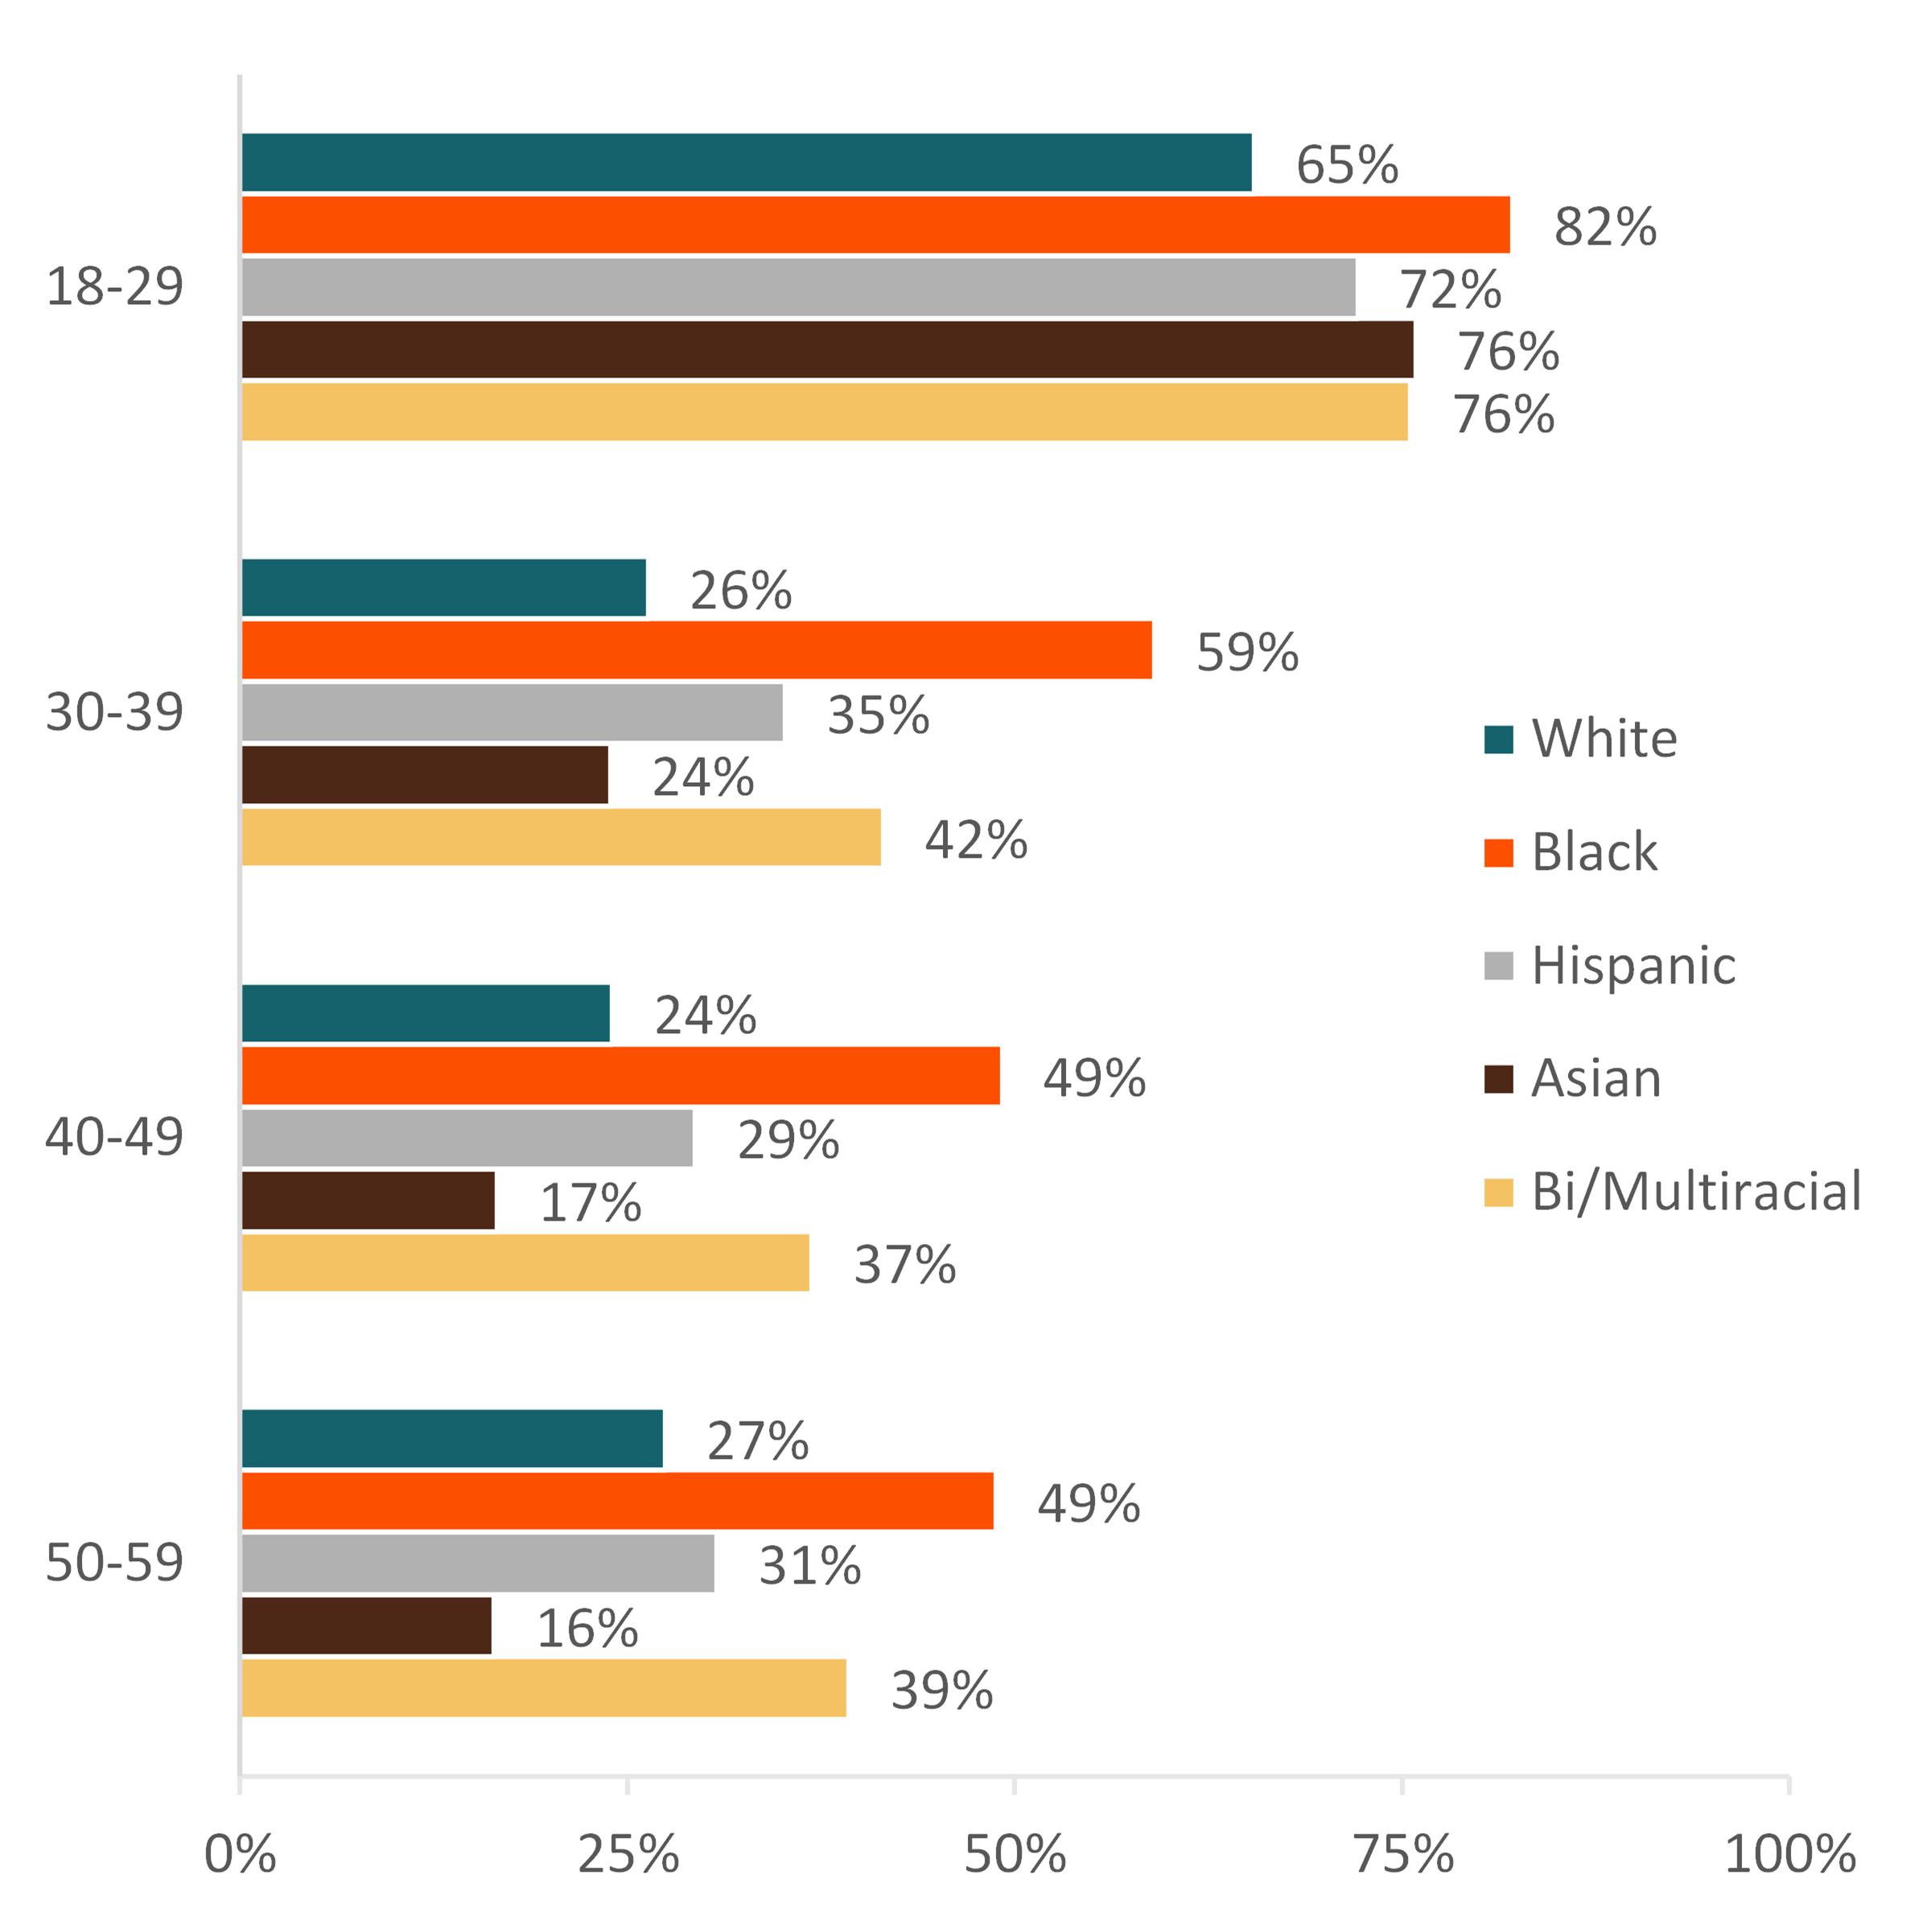 graph showing Figure 2. Percentage of Single Individuals, by Race and Age Group, 2022